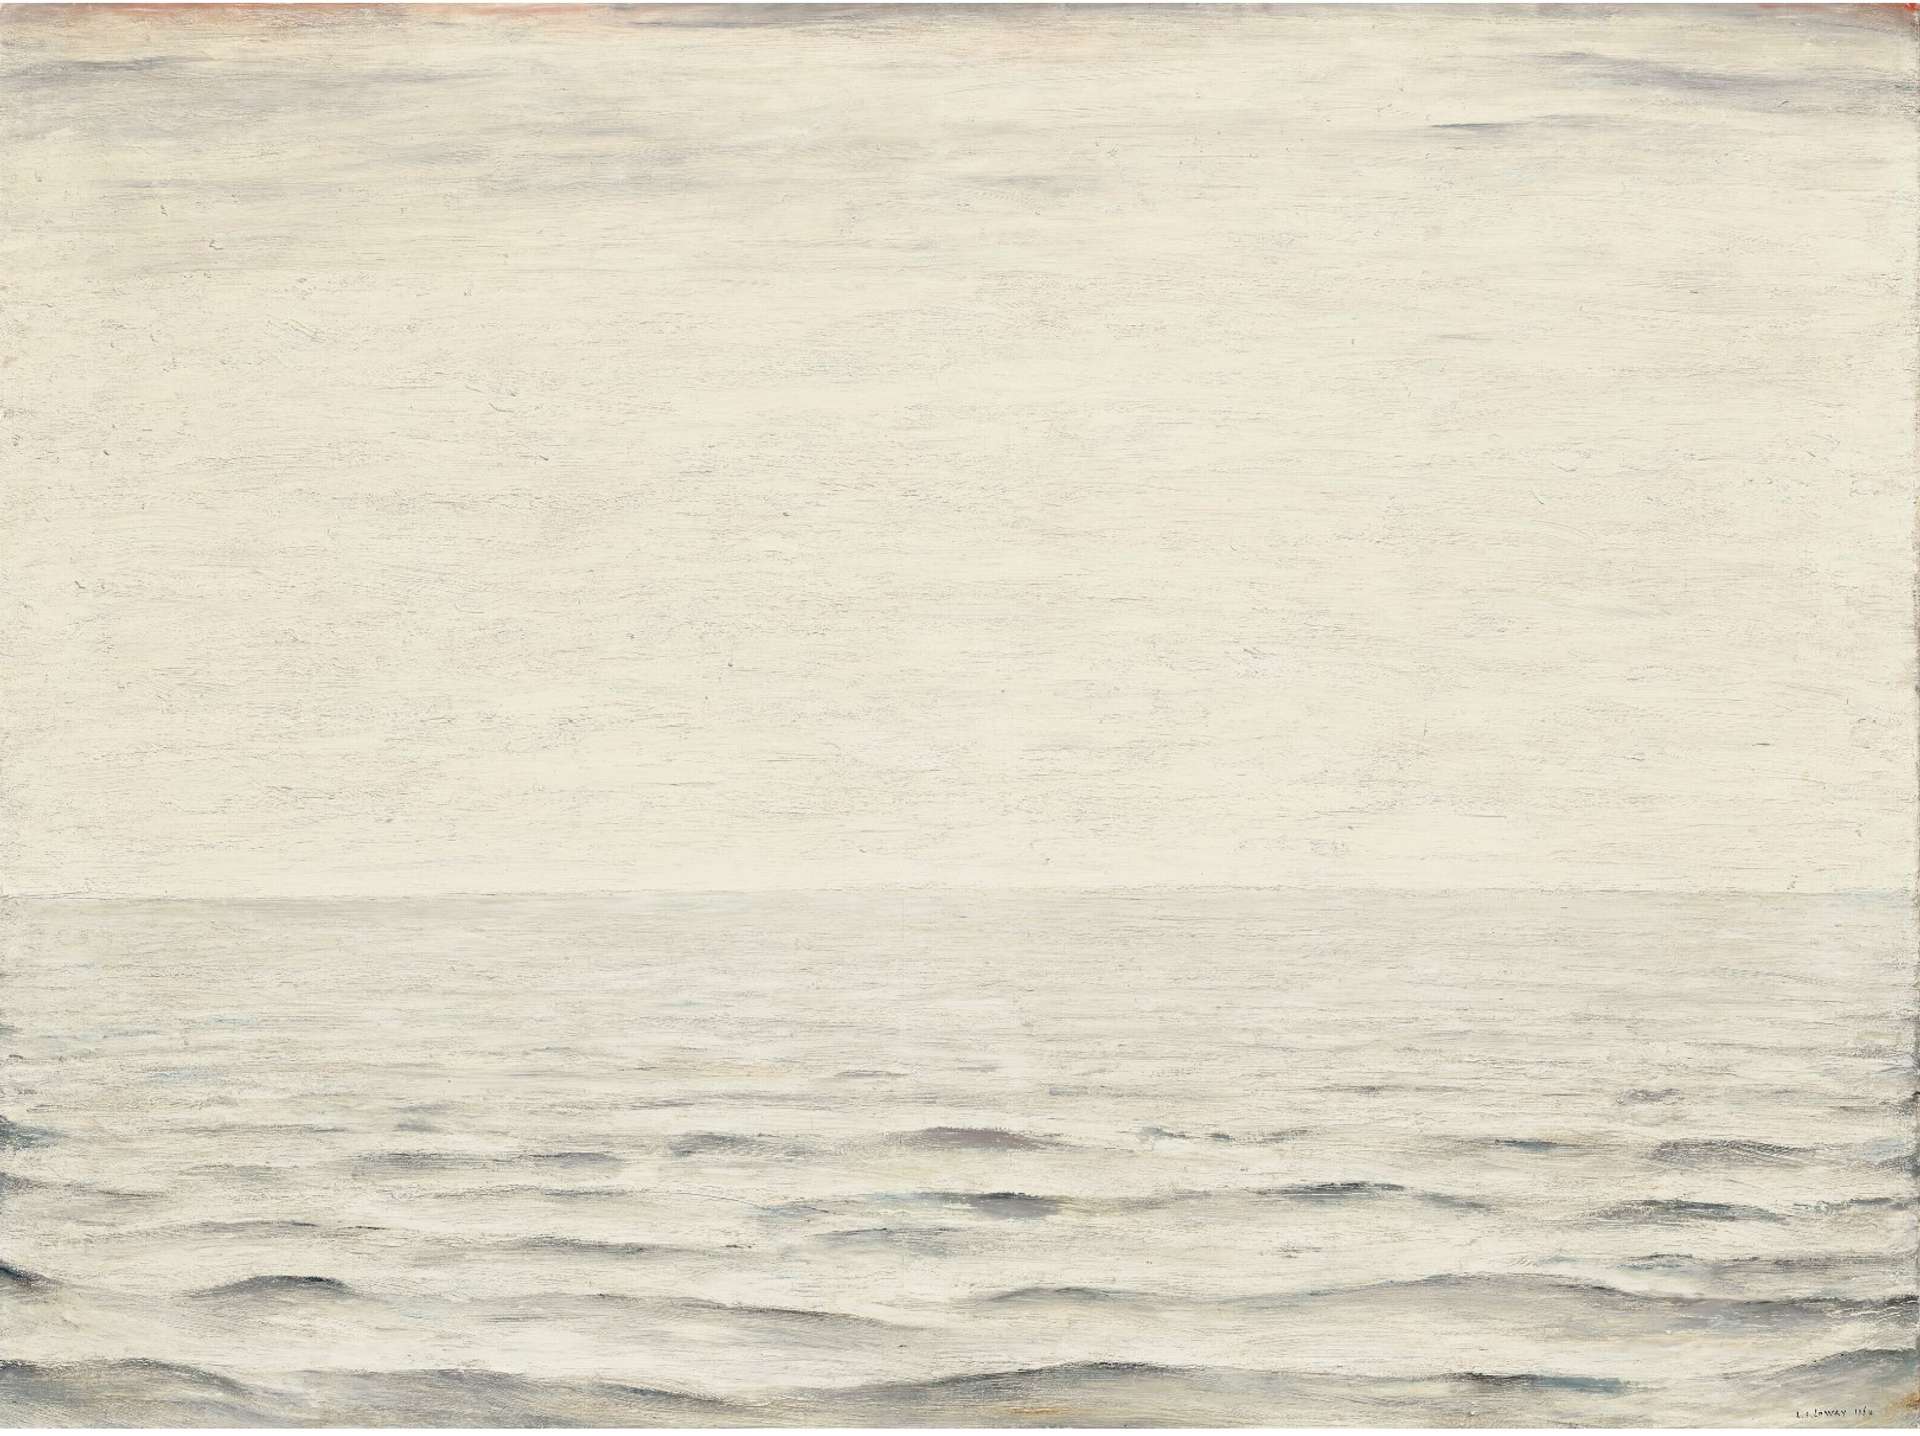 The Sea by L S Lowry